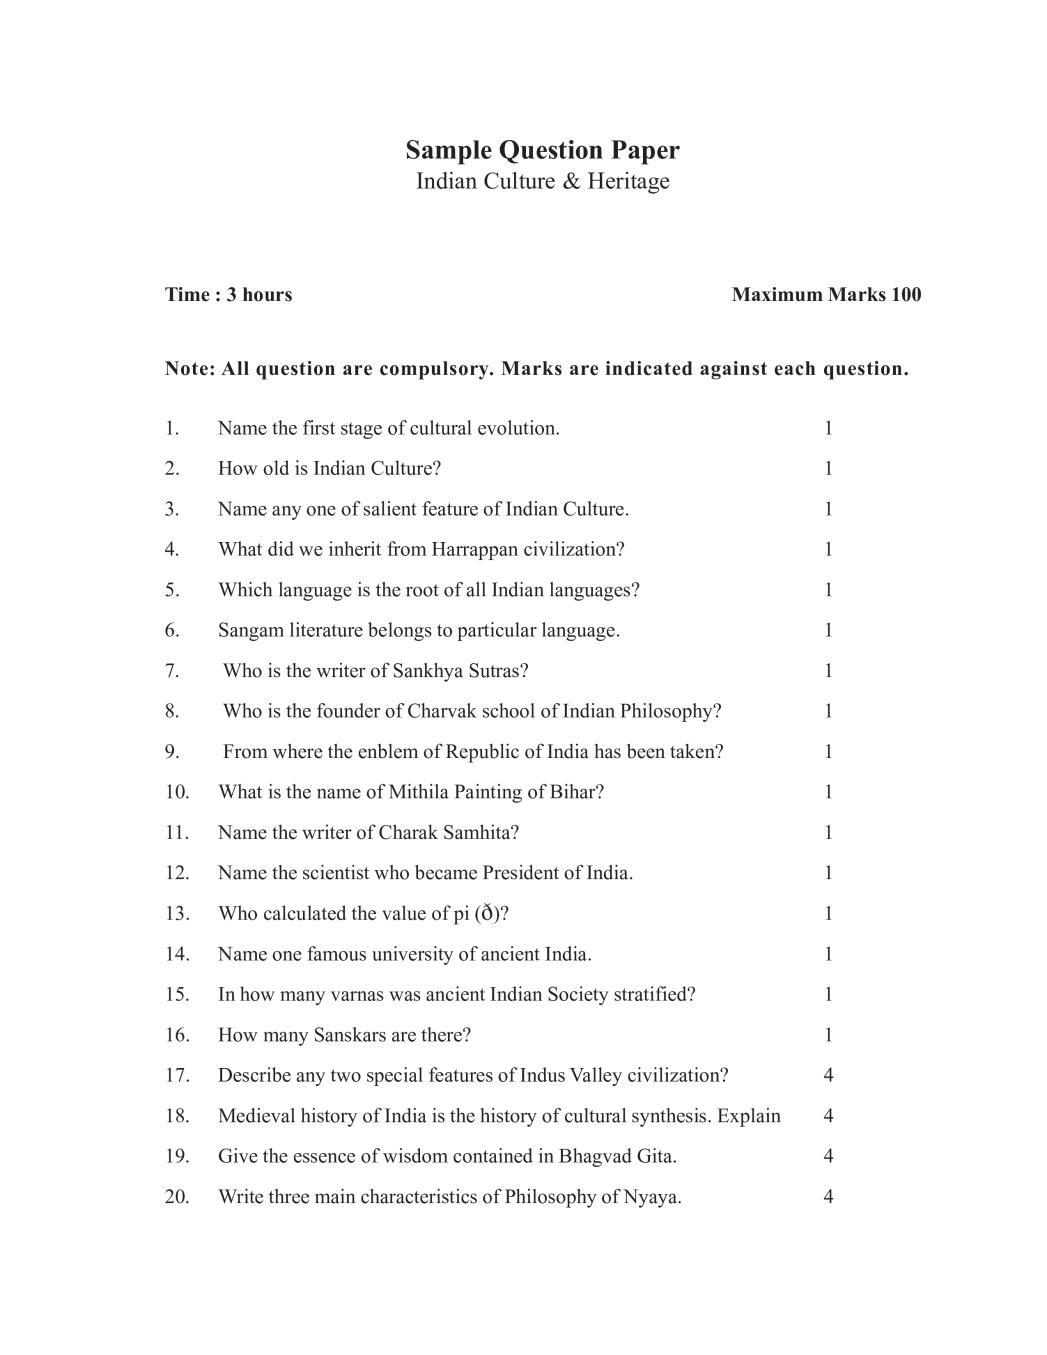 NIOS Class 10 Sample Paper 2020 - Indian Culture and Heritage - Page 1